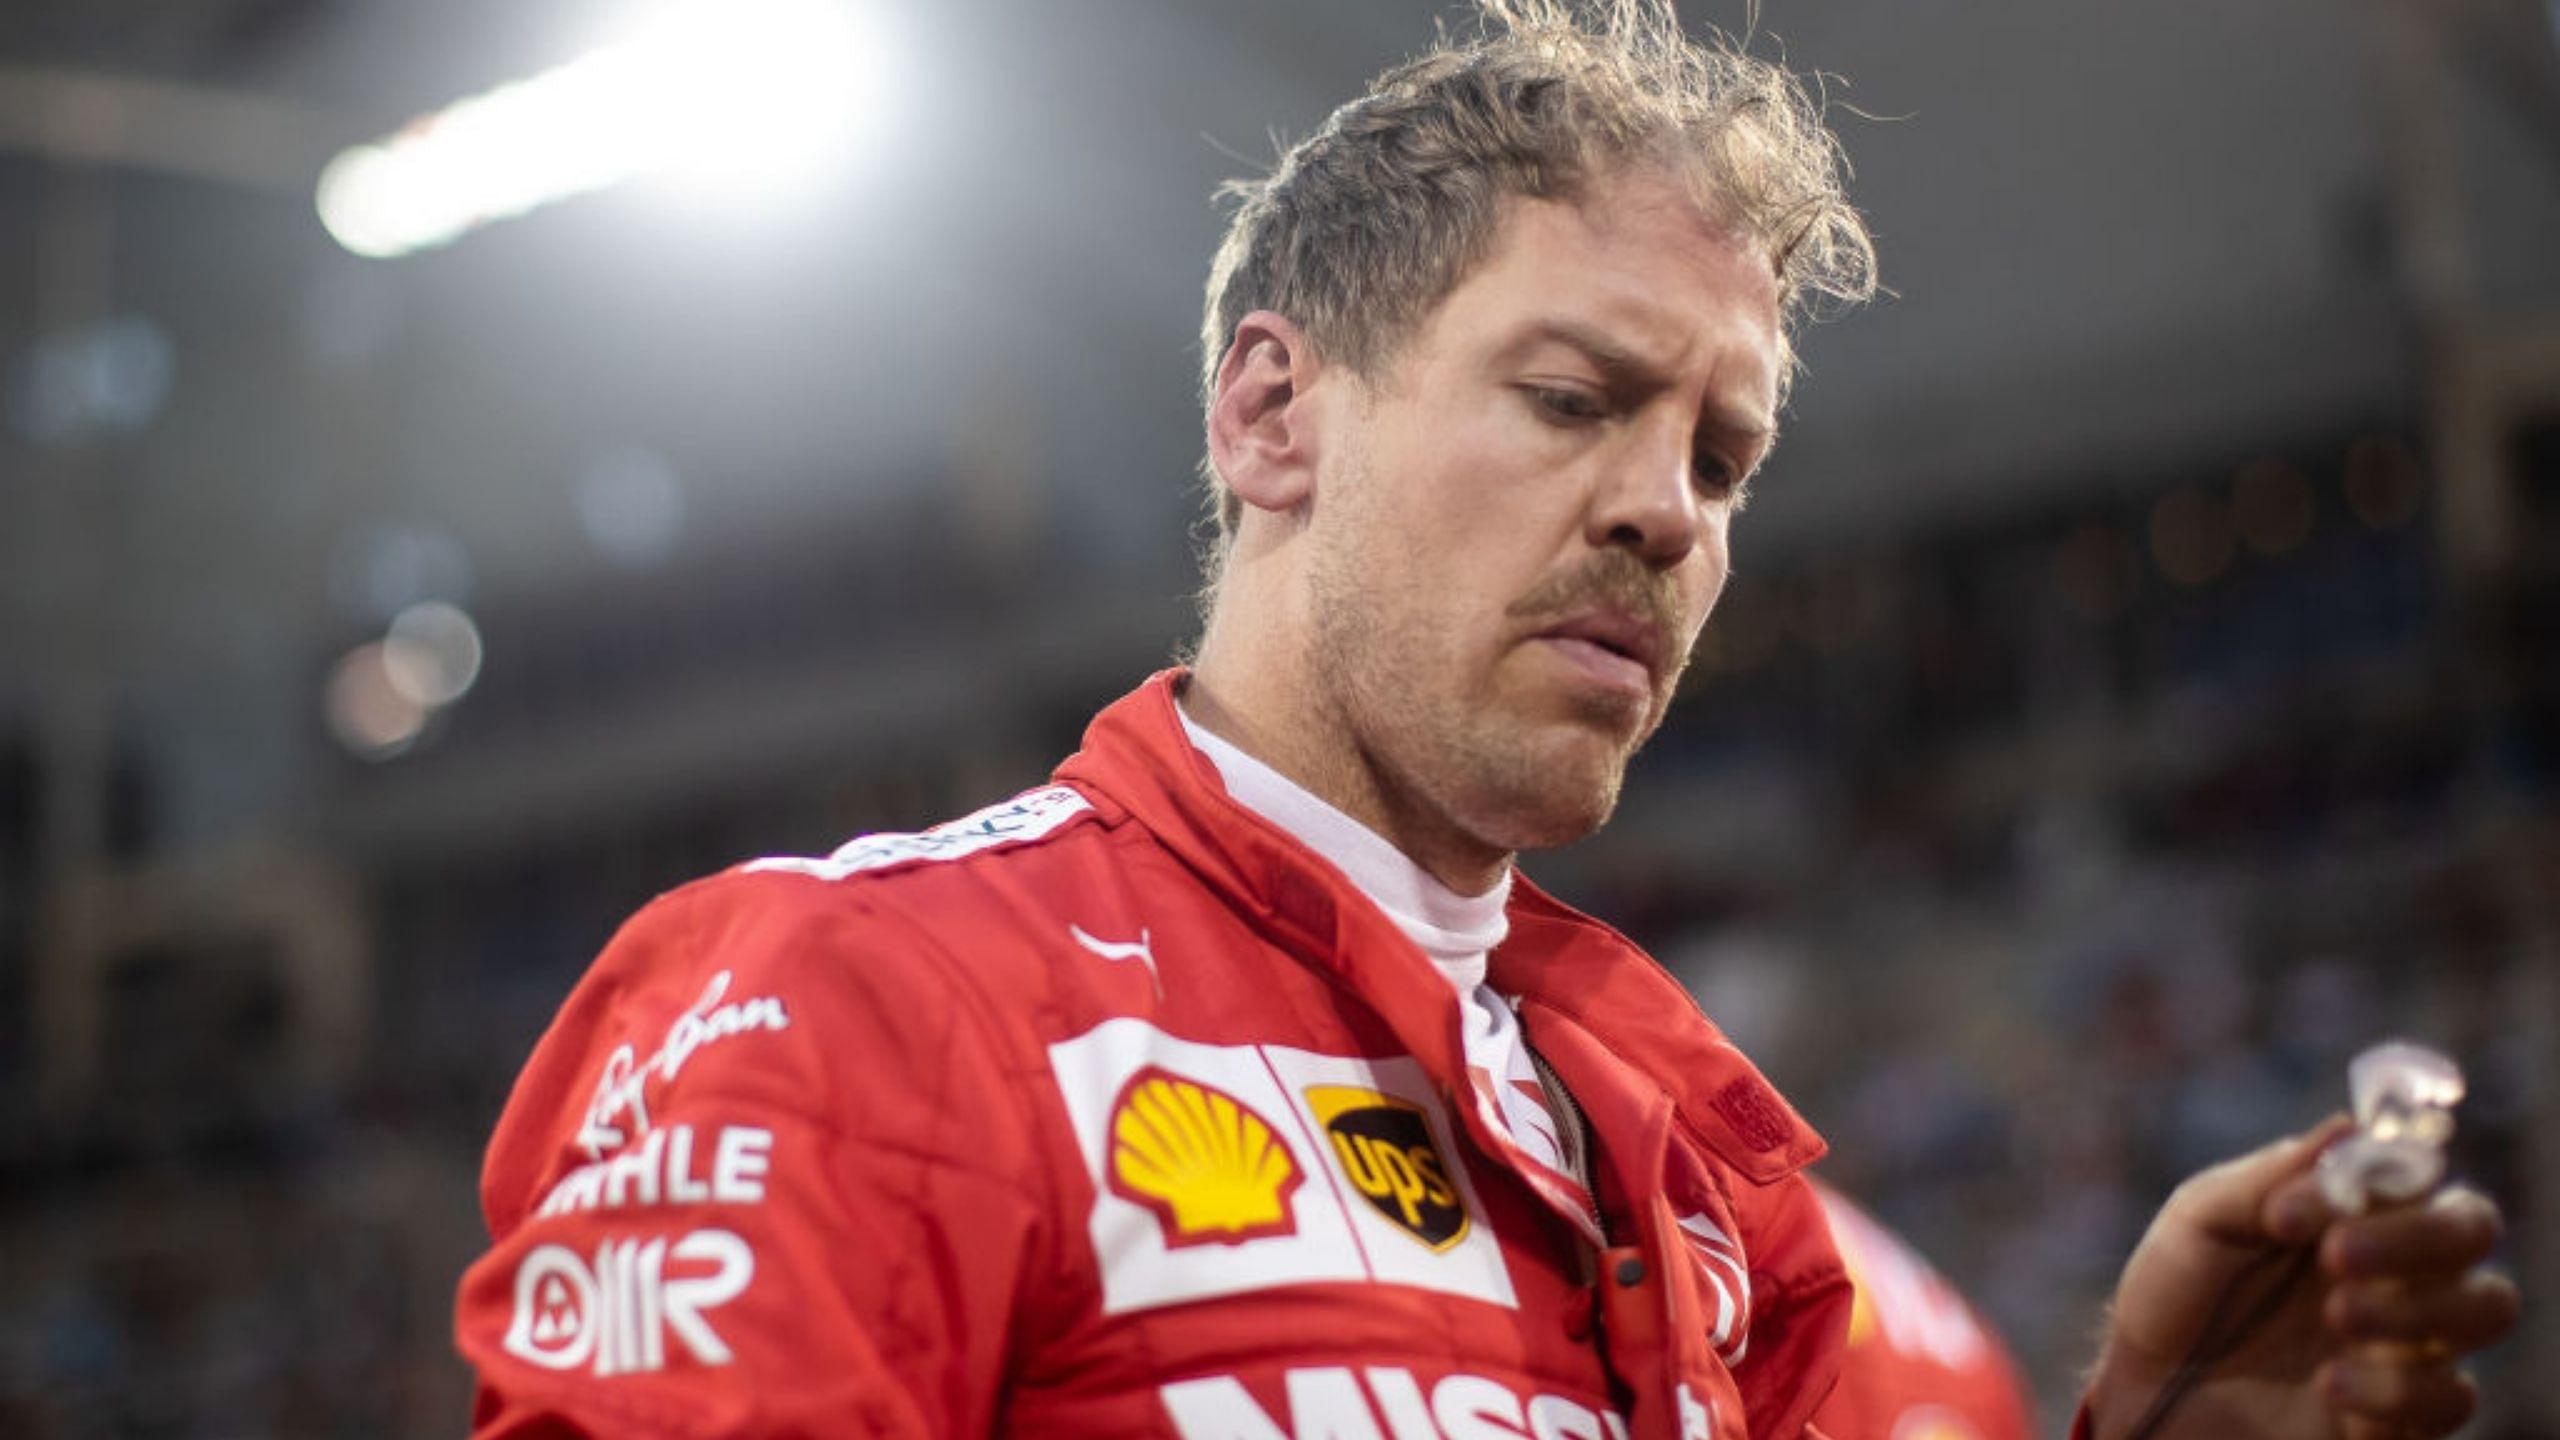 "That is the attraction" - Ferrari driver Sebastian Vettel reveals what makes him stand out in the rain